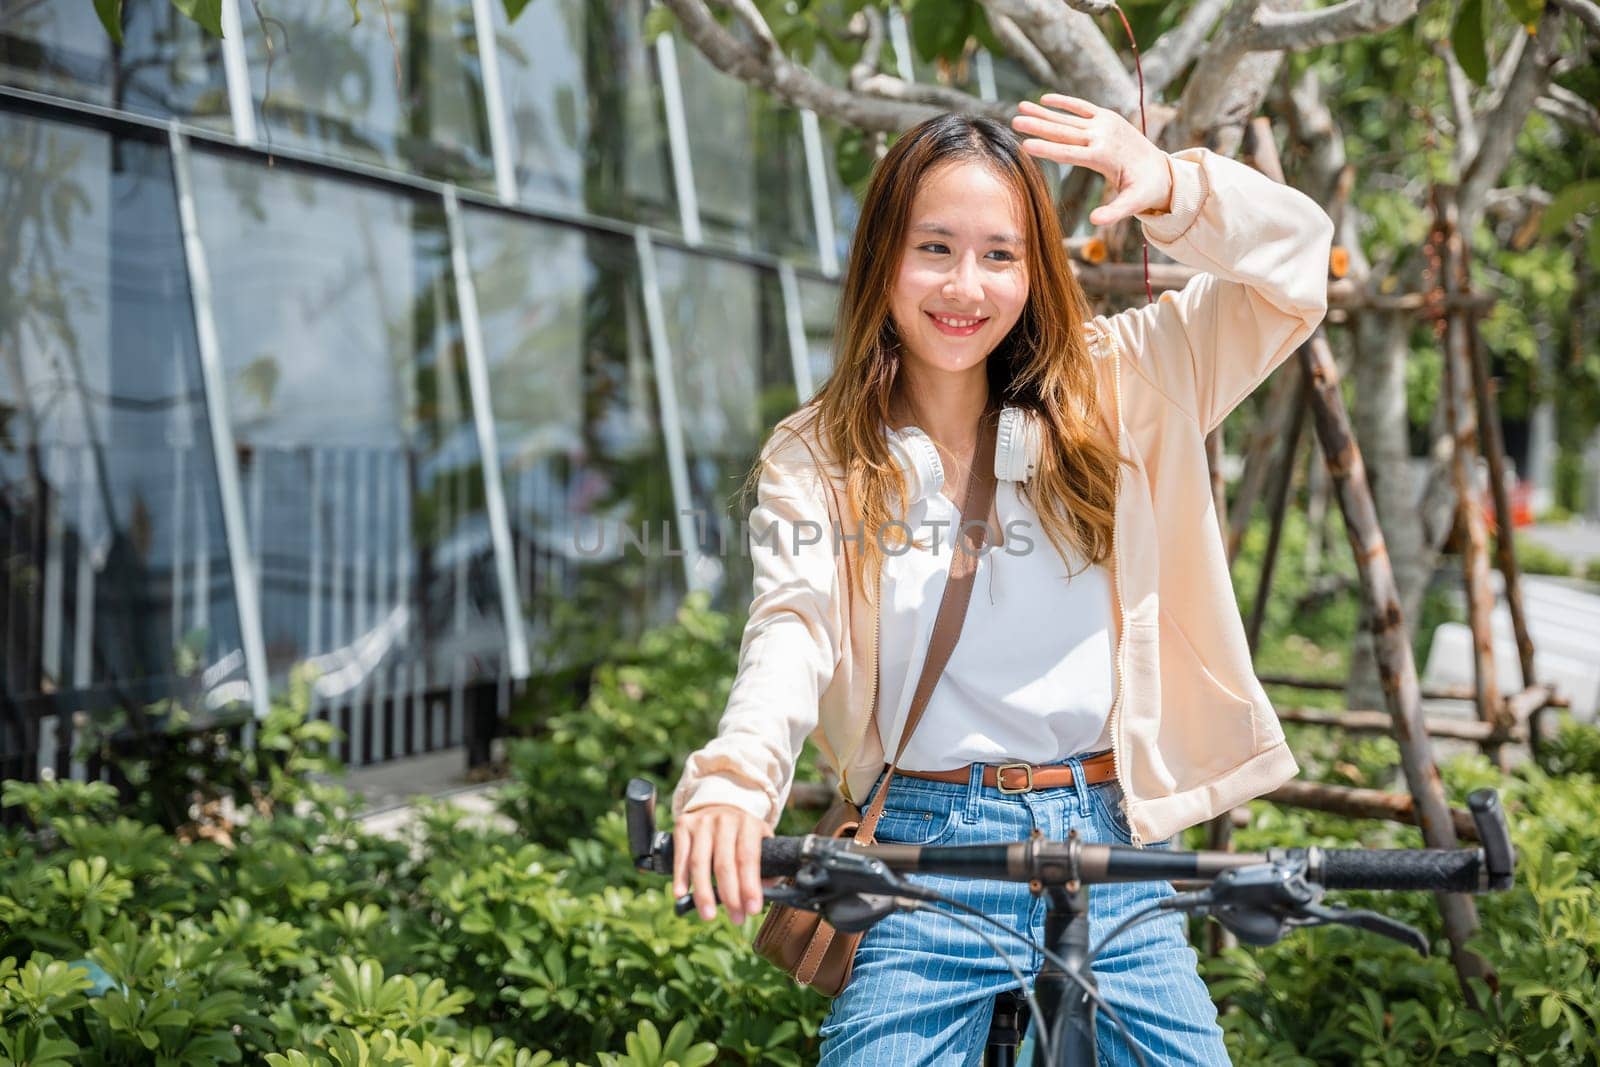 Amidst the city a cheerful young woman shields from the hot sun on her bicycle capturing the beauty of outdoor fun and fashion. This season is all about happiness and nature.